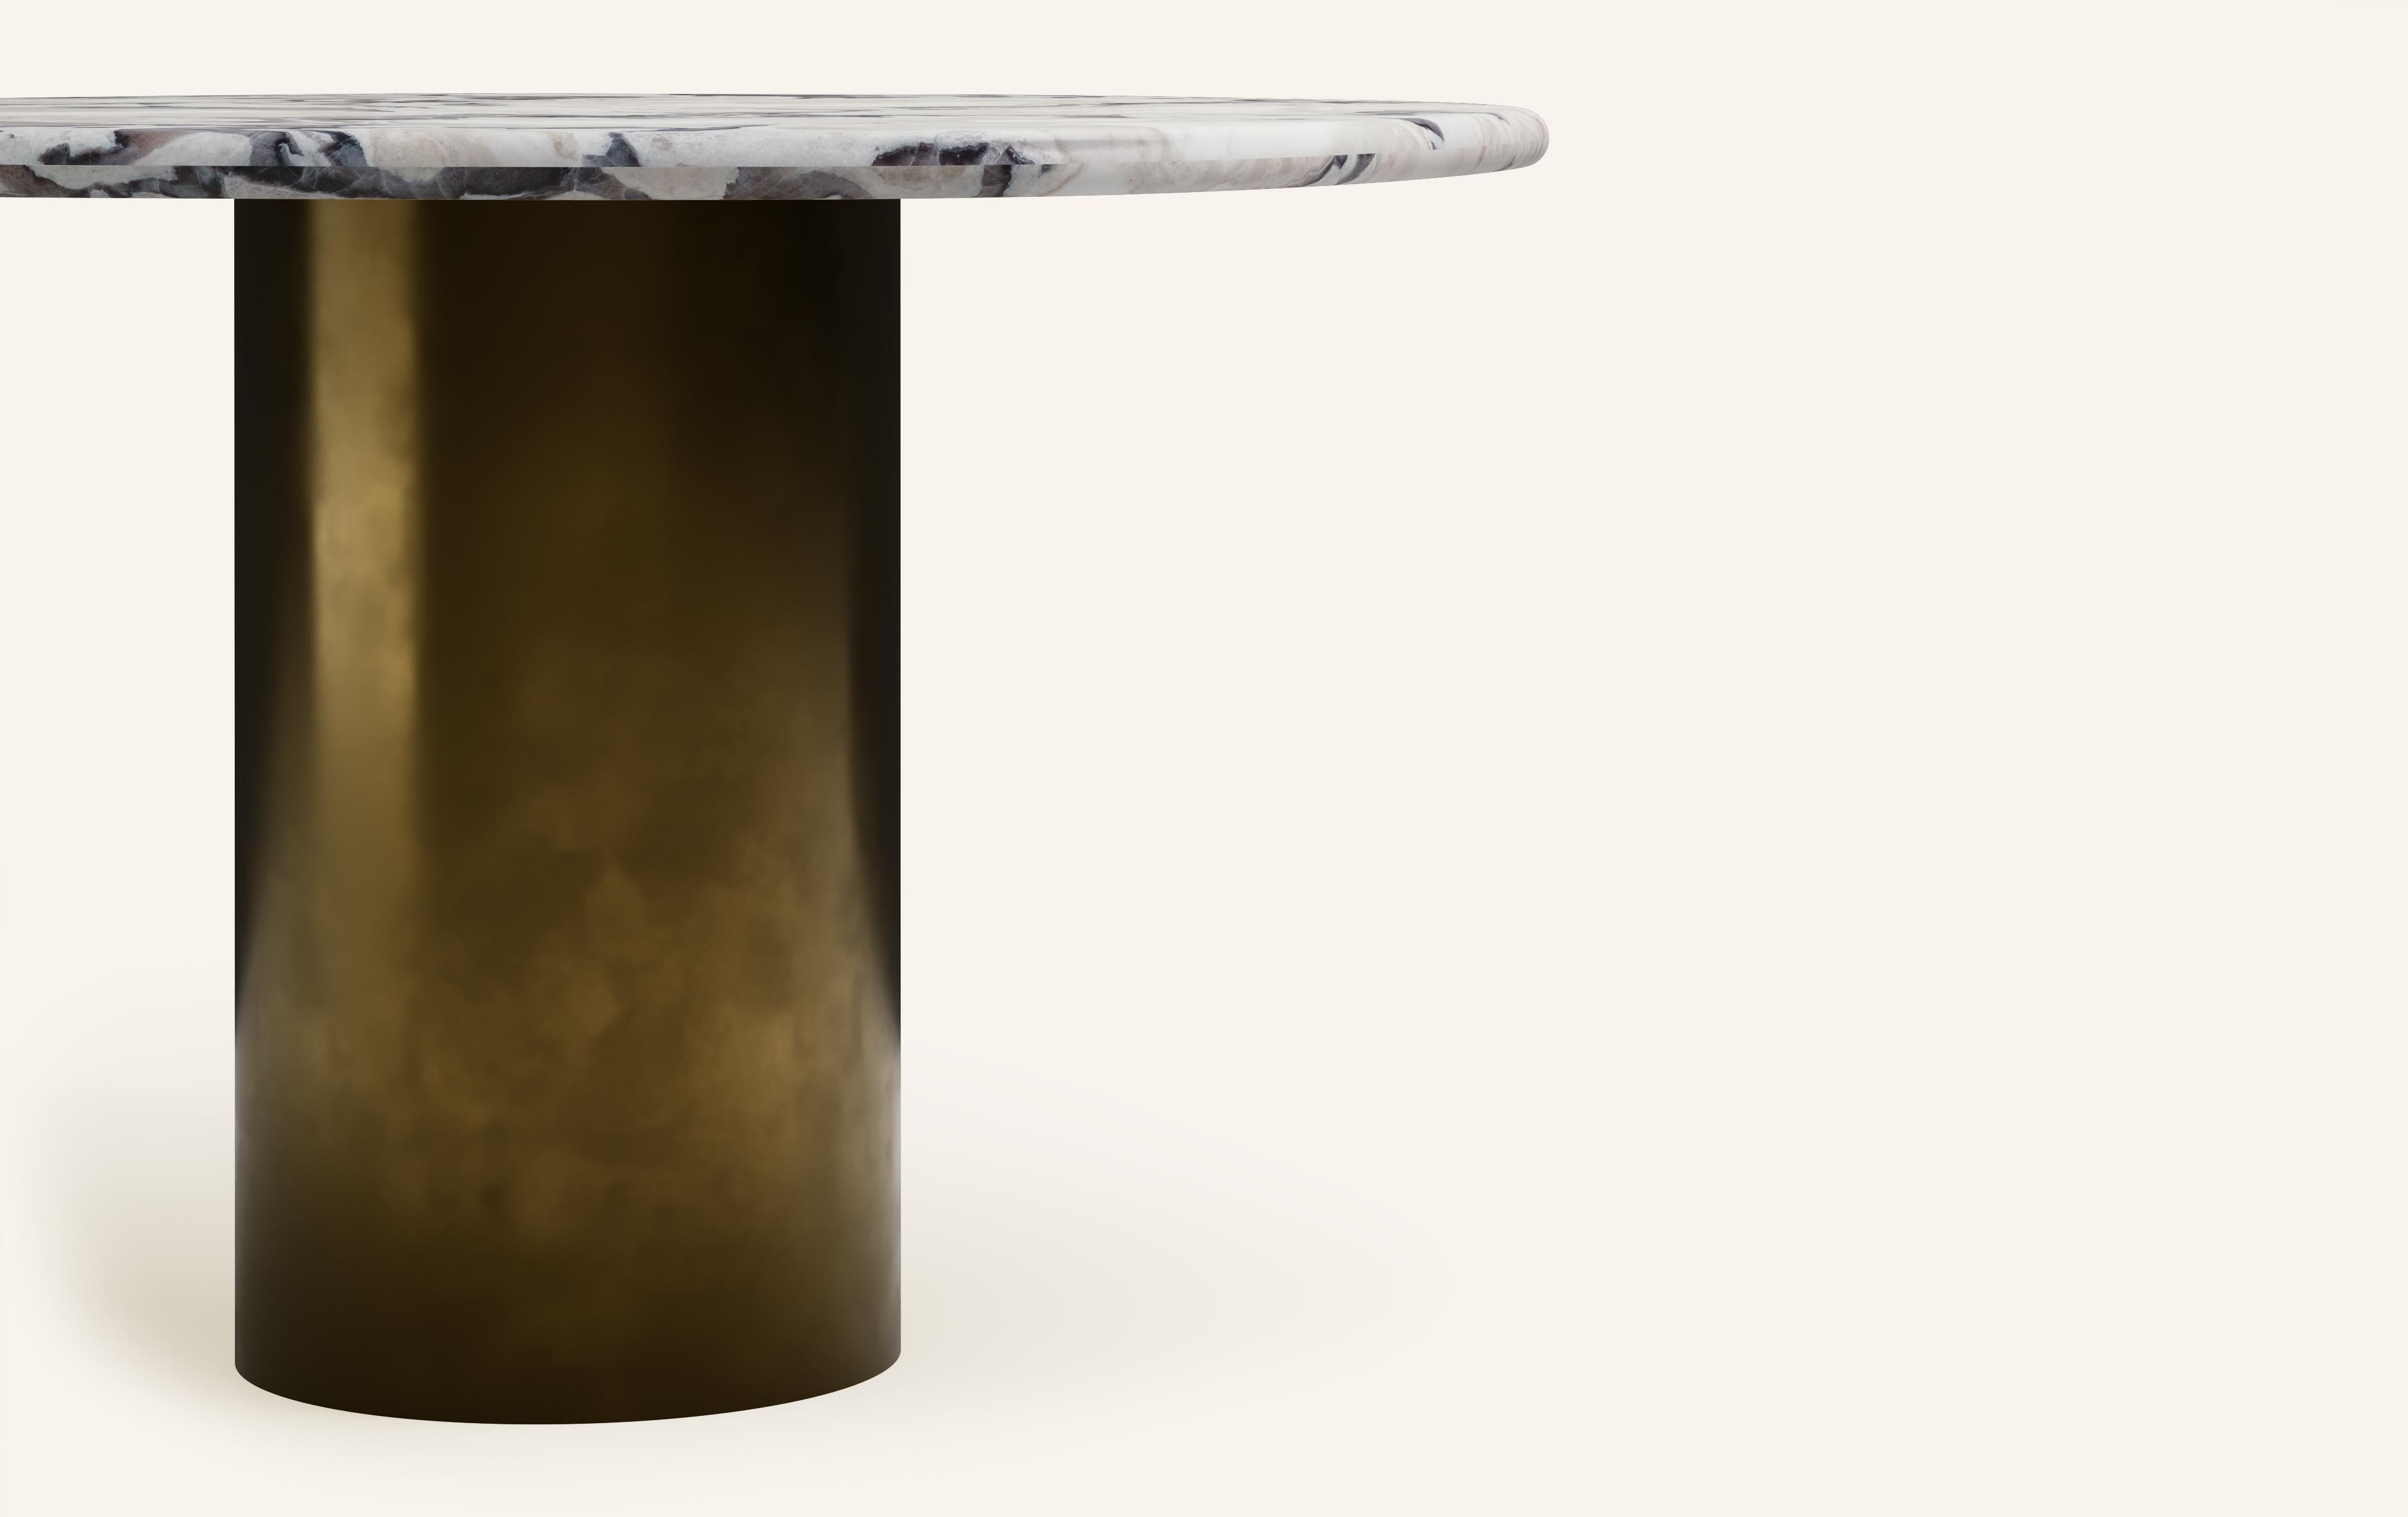 Organic Modern FORM(LA) Lago Round Dining Table 42”L x 42”W x 30”H Oyster Marble & Bronze For Sale